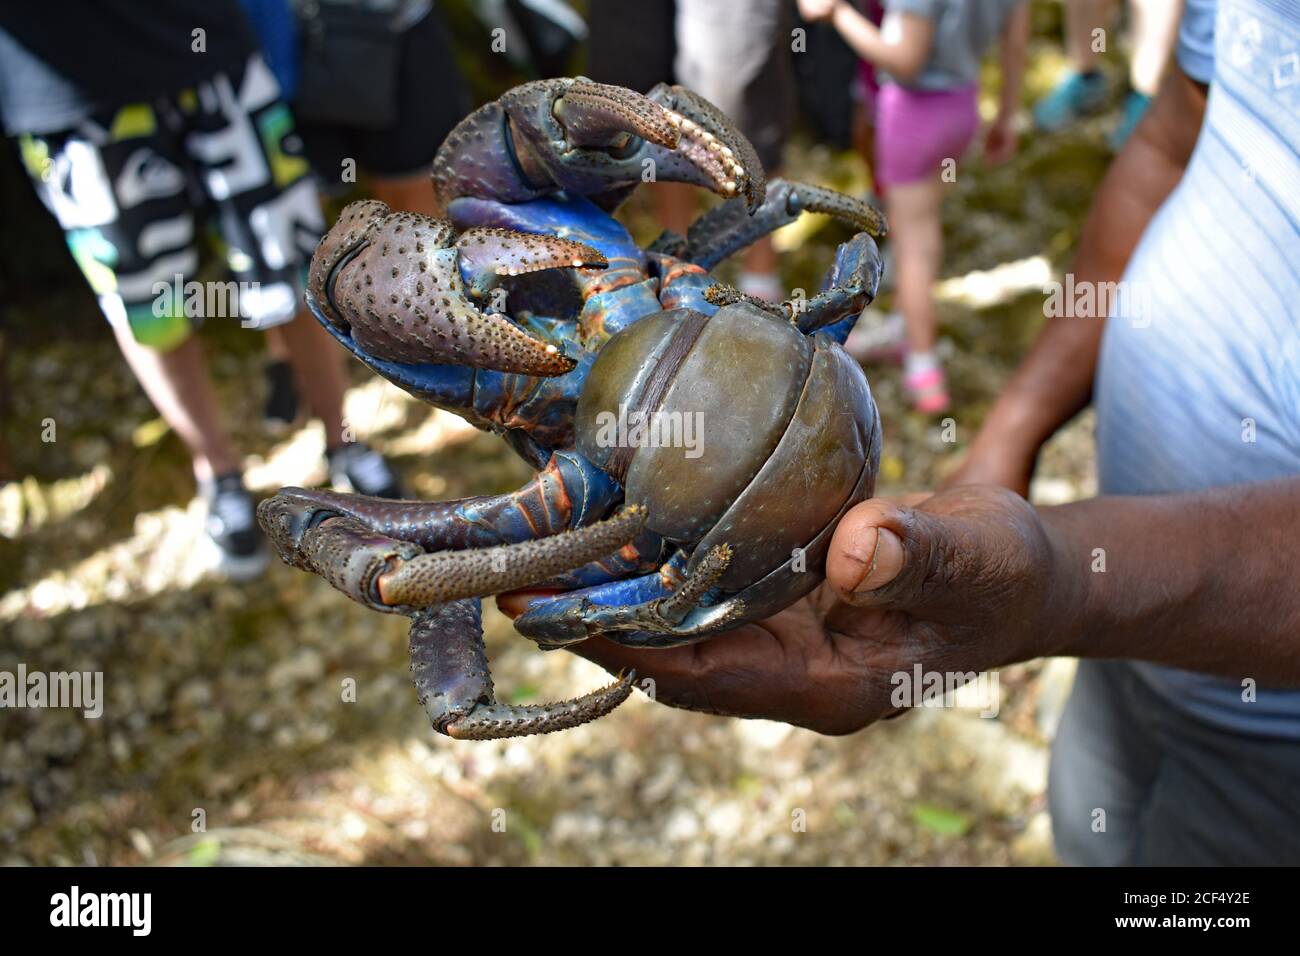 A Coconut Crab (Birgus latro) being held in a local man's hand.  Tourists are overlooking the crab which has a bright blue and orange underside. Stock Photo